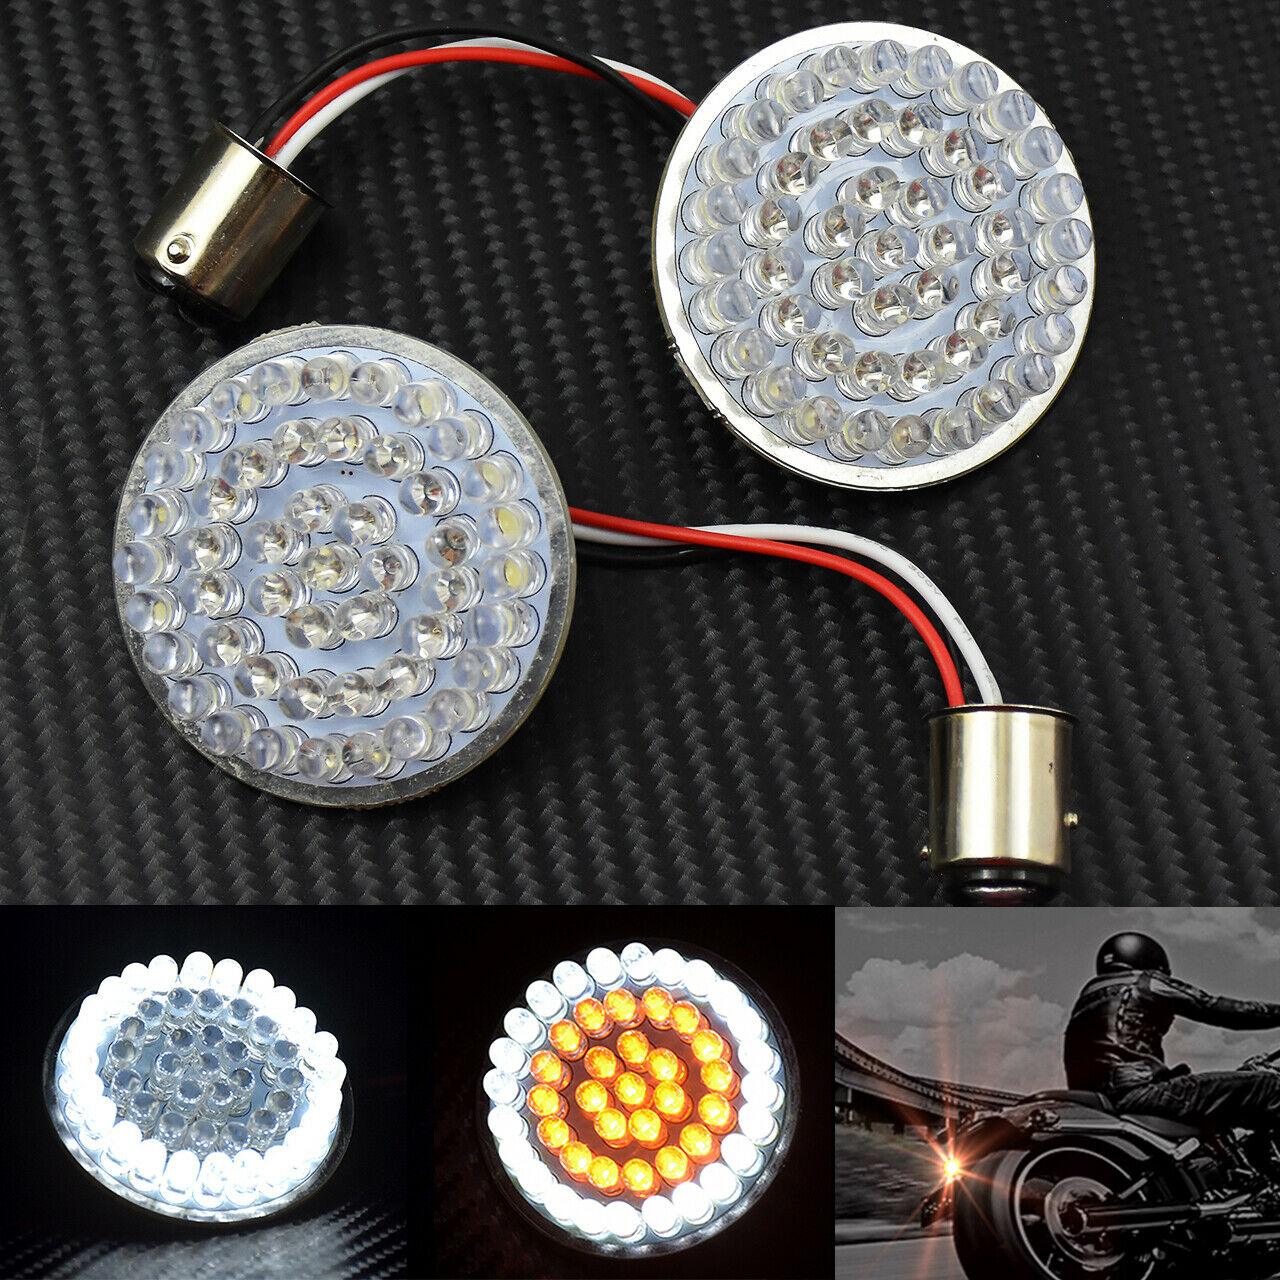 2'' 1157 Turn Signal White/Amber LED Light w/ Clear Lens Cover Fit For Harley - Moto Life Products